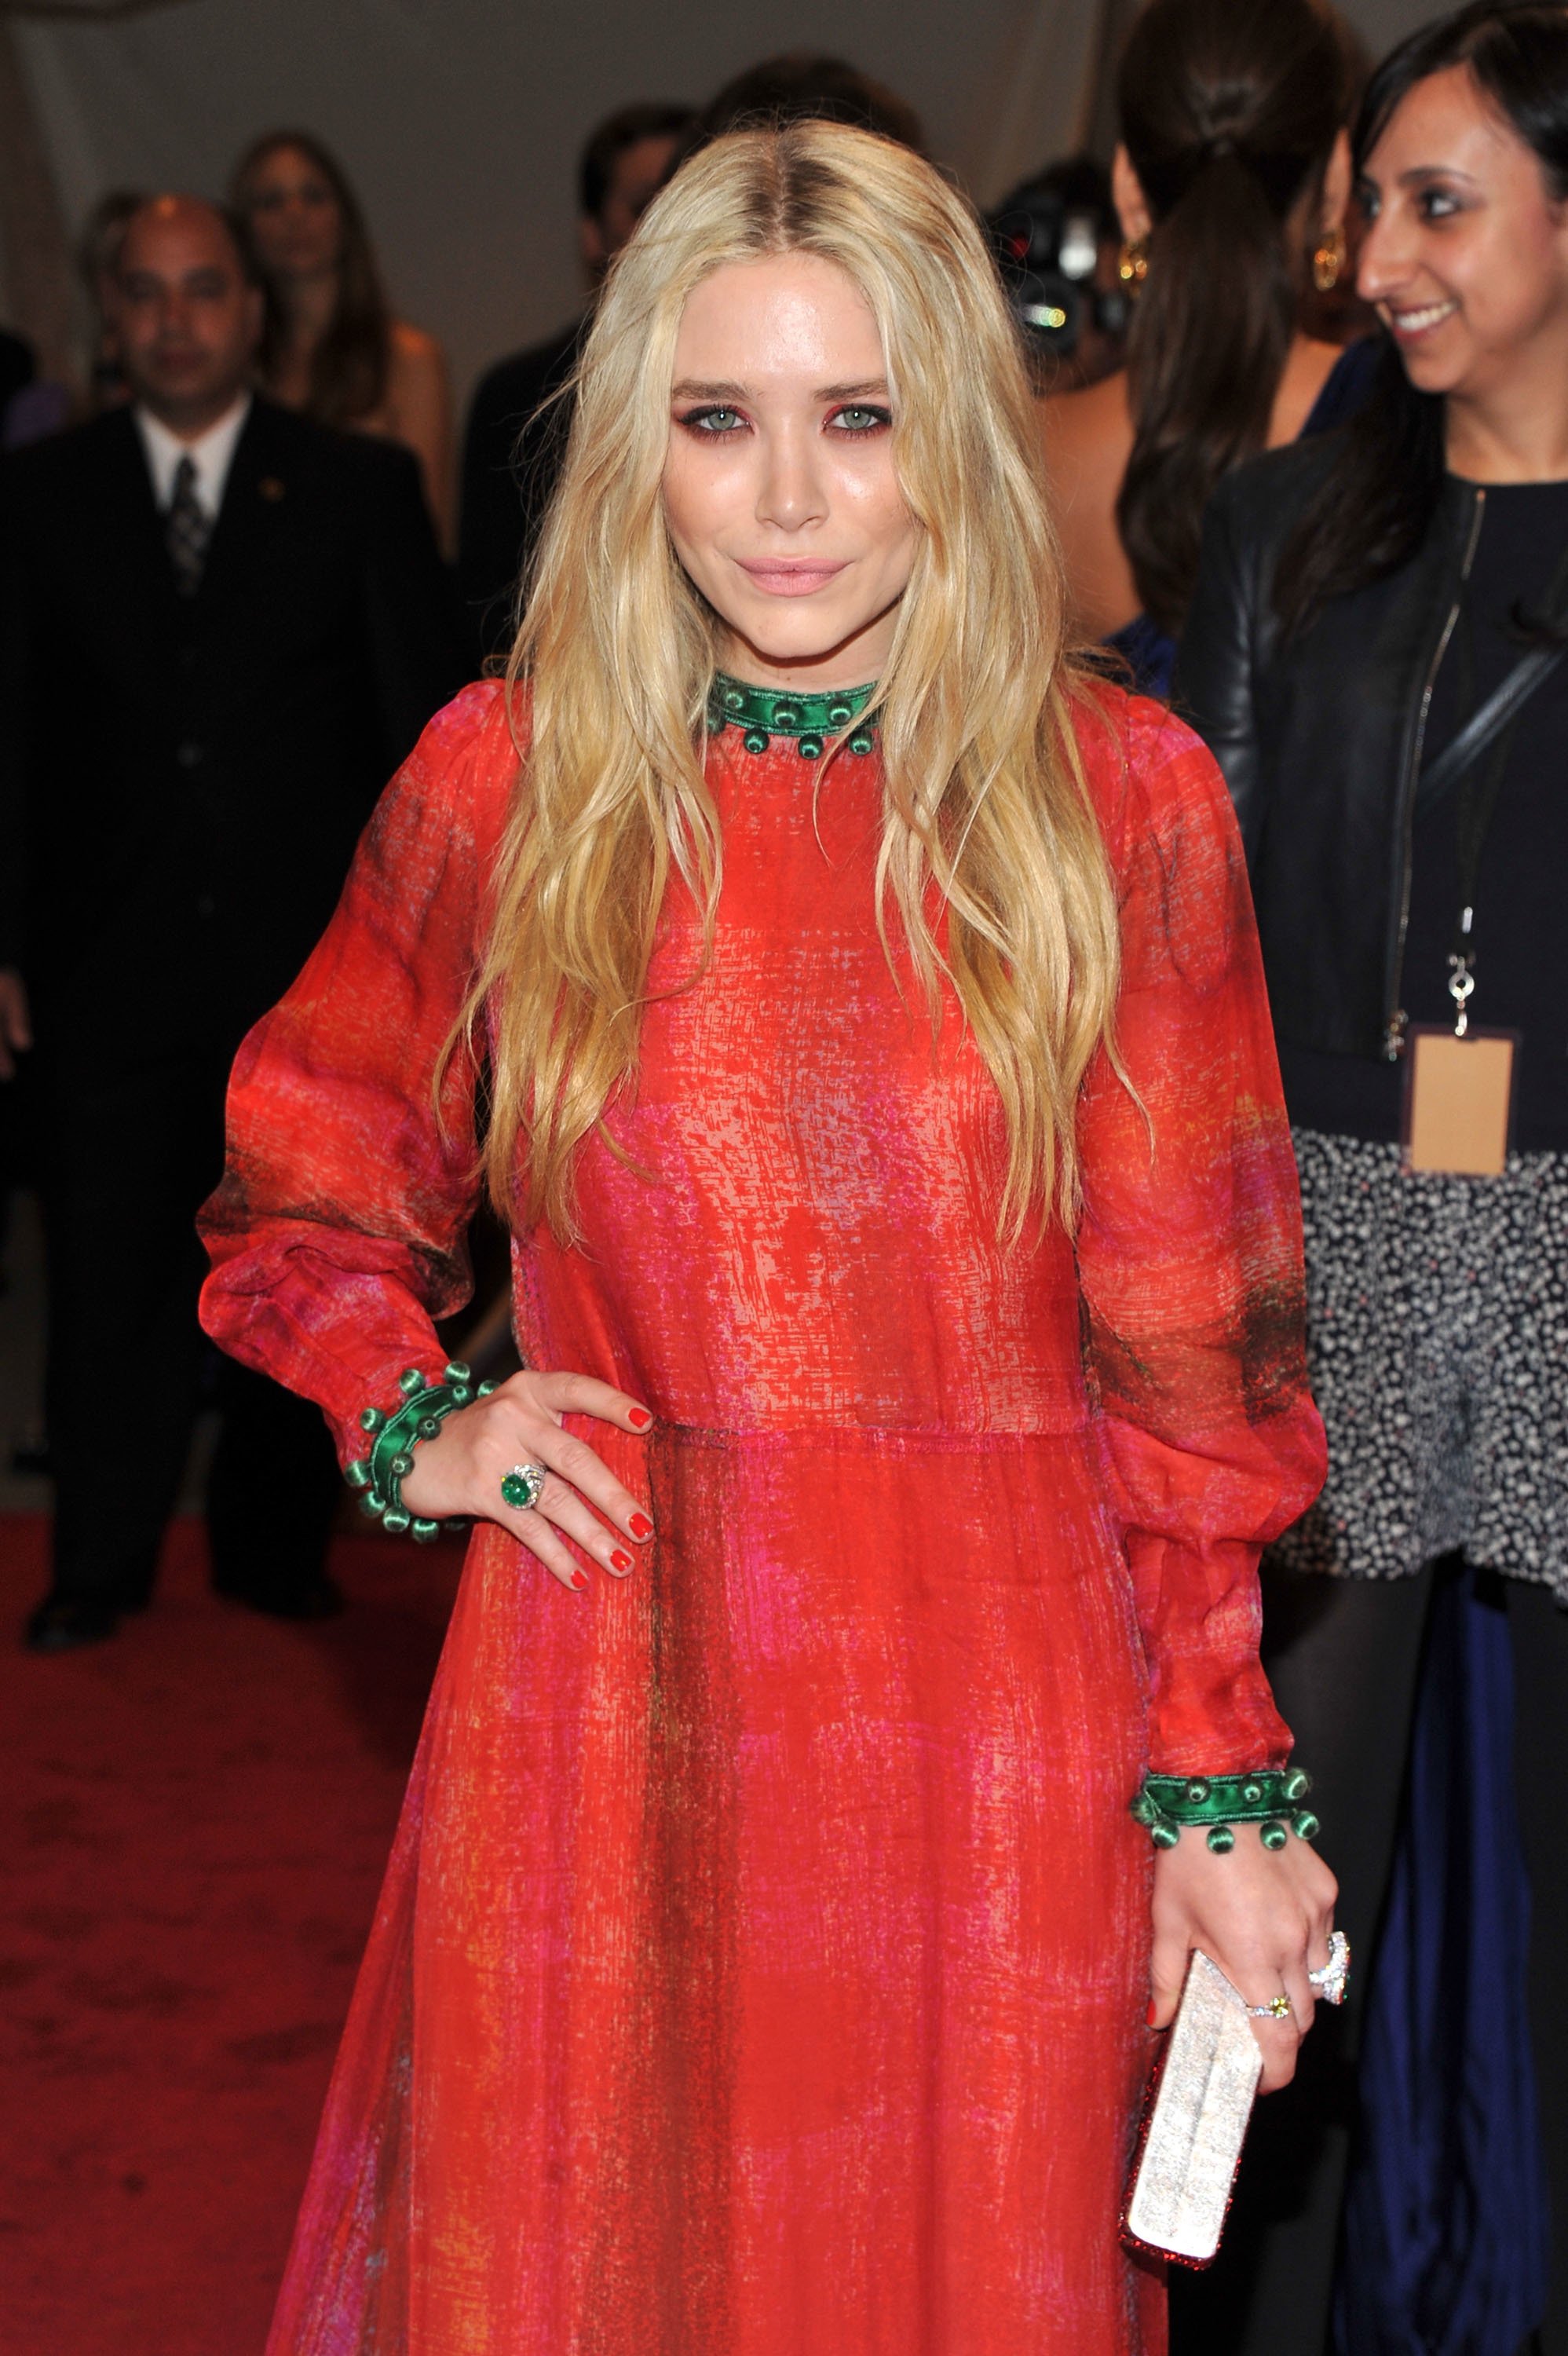 Mary-Kate Olsen attends the "Alexander McQueen: Savage Beauty" Costume Institute Gala at The Metropolitan Museum of Art on May 2, 2011 in New York City | Photo: Getty Images 